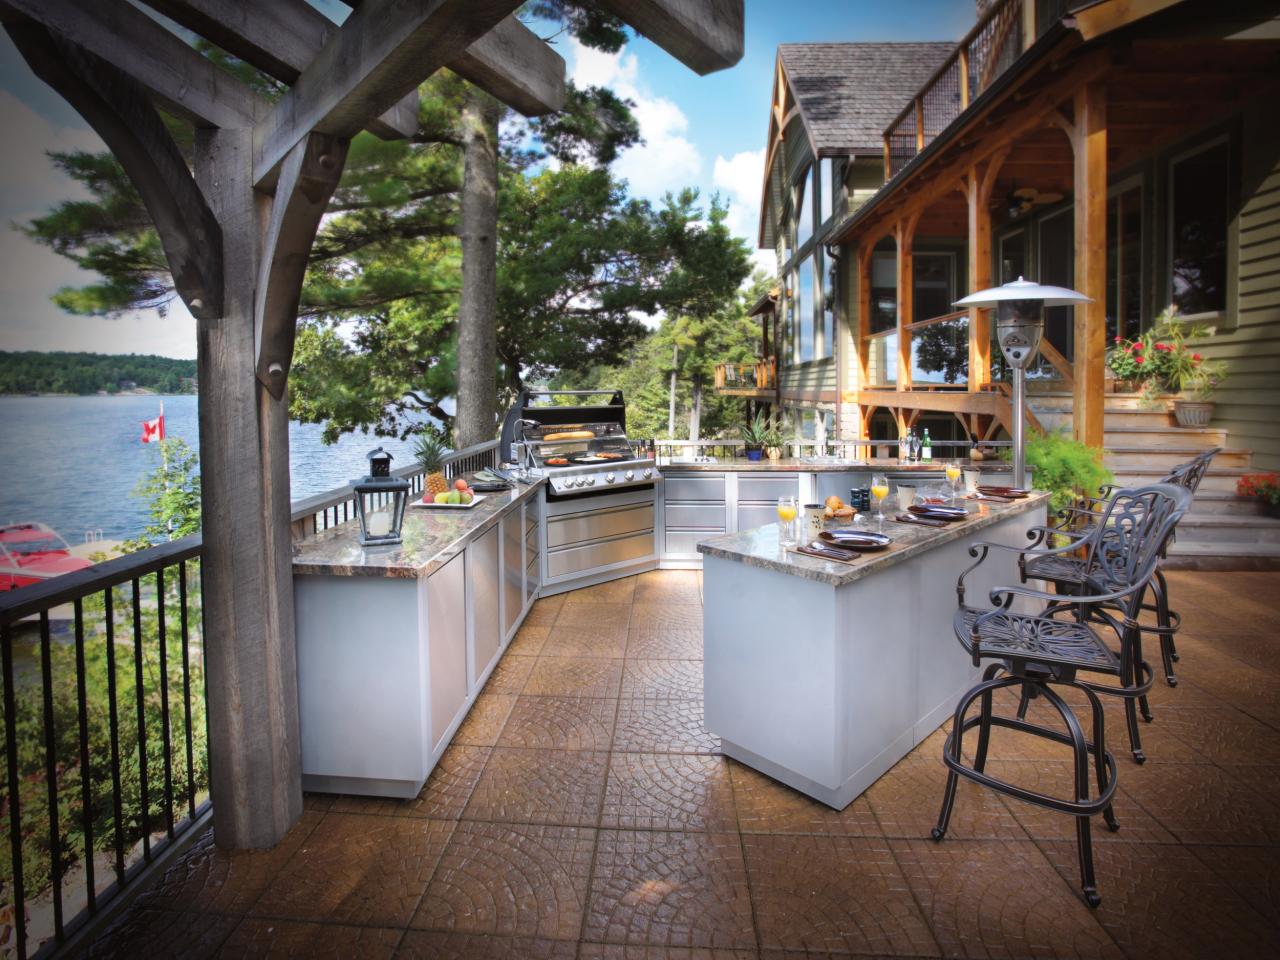 Outdoor Kitchen Ideas Inspirational Pictures Of Outdoor Kitchens